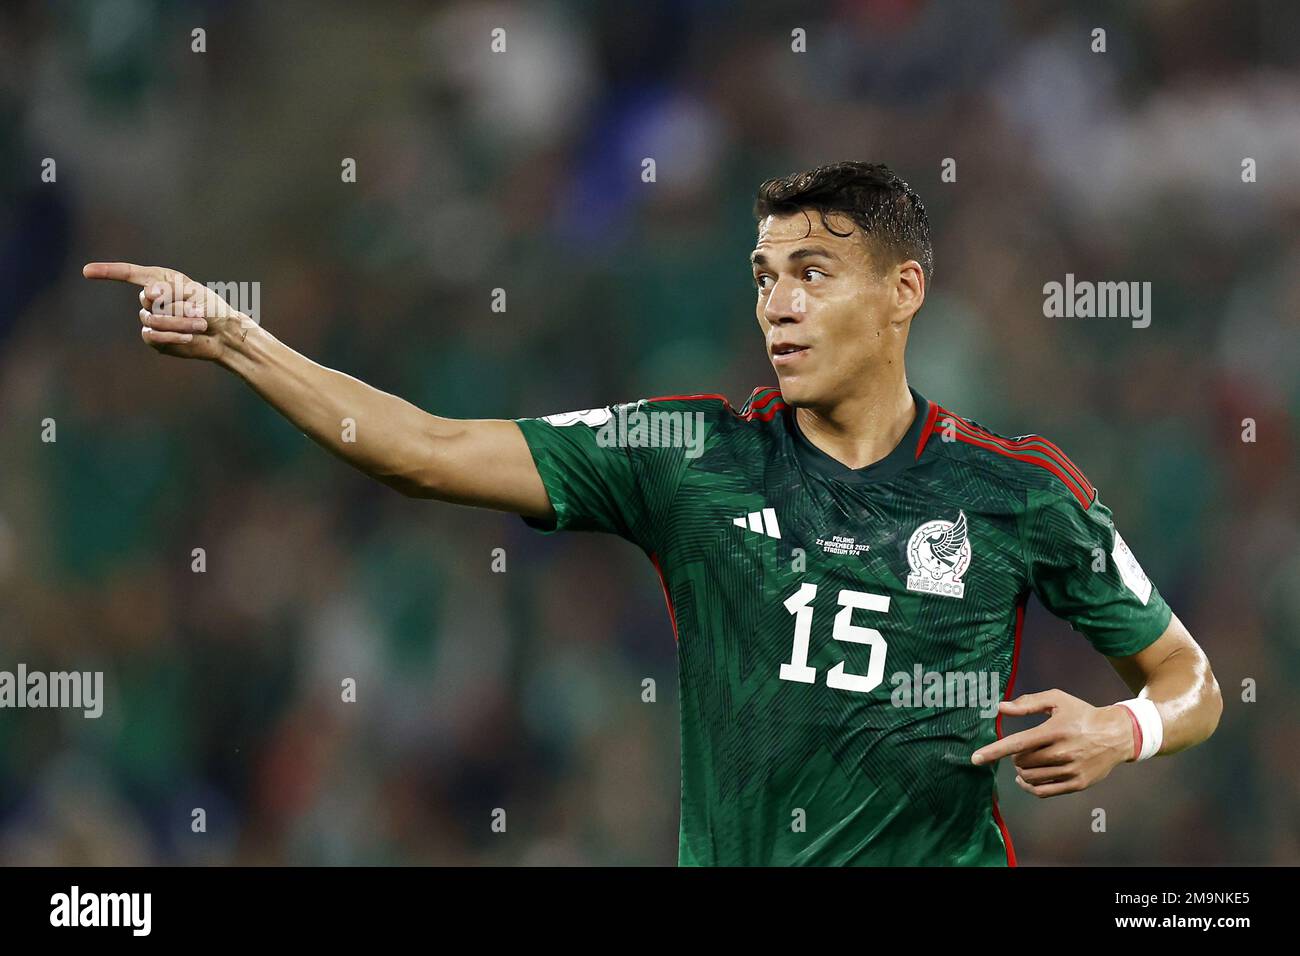 DOHA - Hector Moreno of Mexico during the FIFA World Cup Qatar 2022 group C match between Mexico and Poland at 974 Stadium on November 22, 2022 in Doha, Qatar. AP | Dutch Height | MAURICE OF STONE Stock Photo